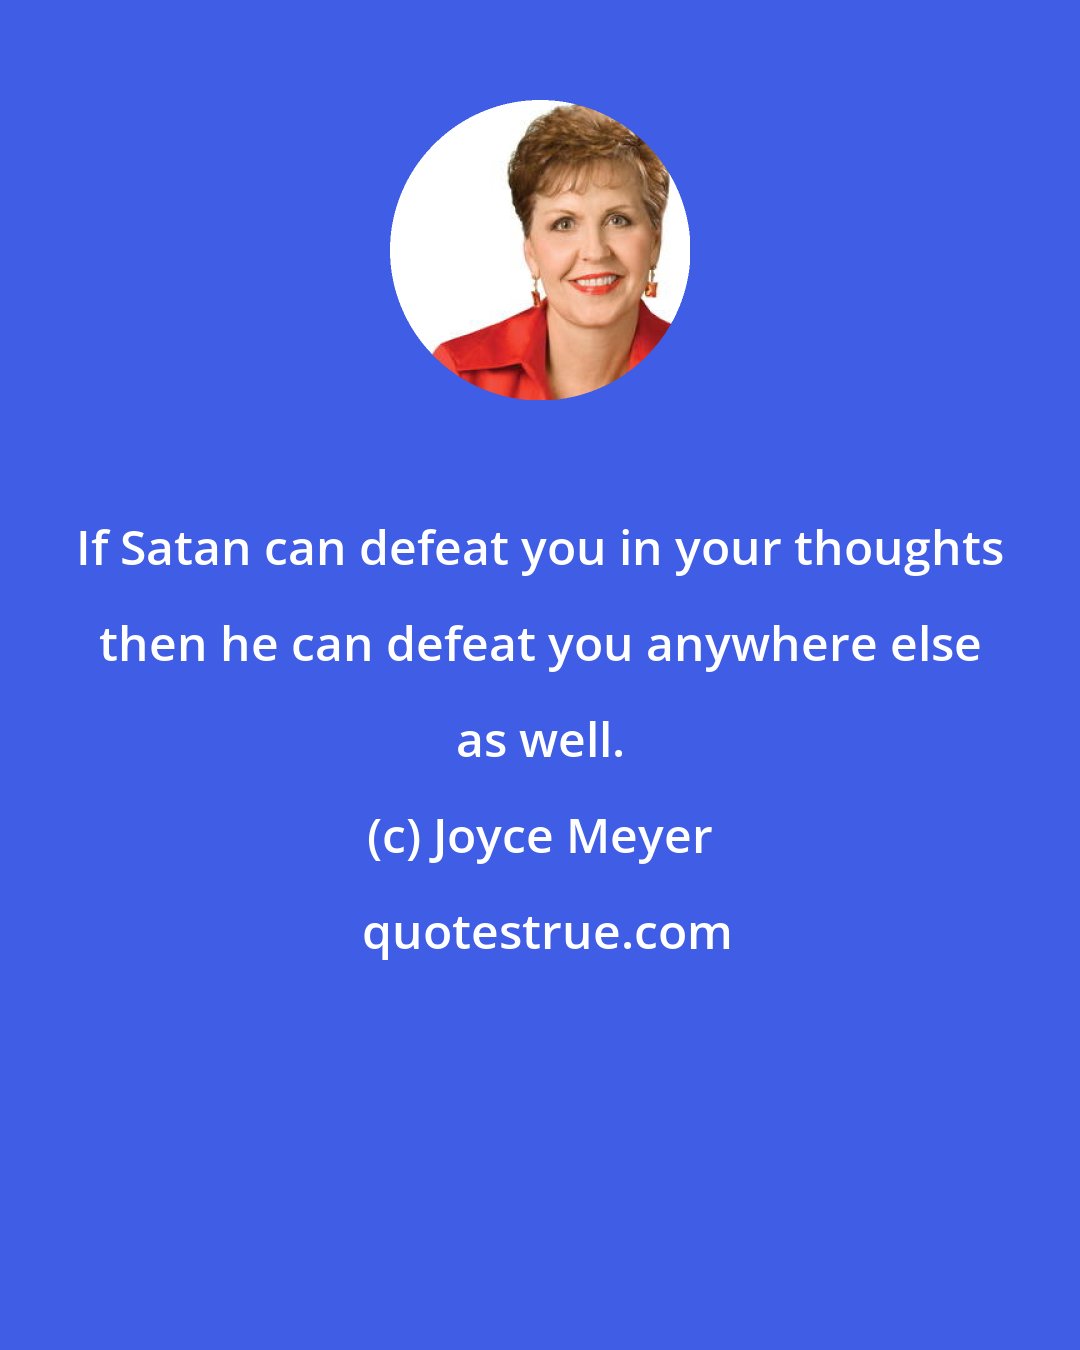 Joyce Meyer: If Satan can defeat you in your thoughts then he can defeat you anywhere else as well.